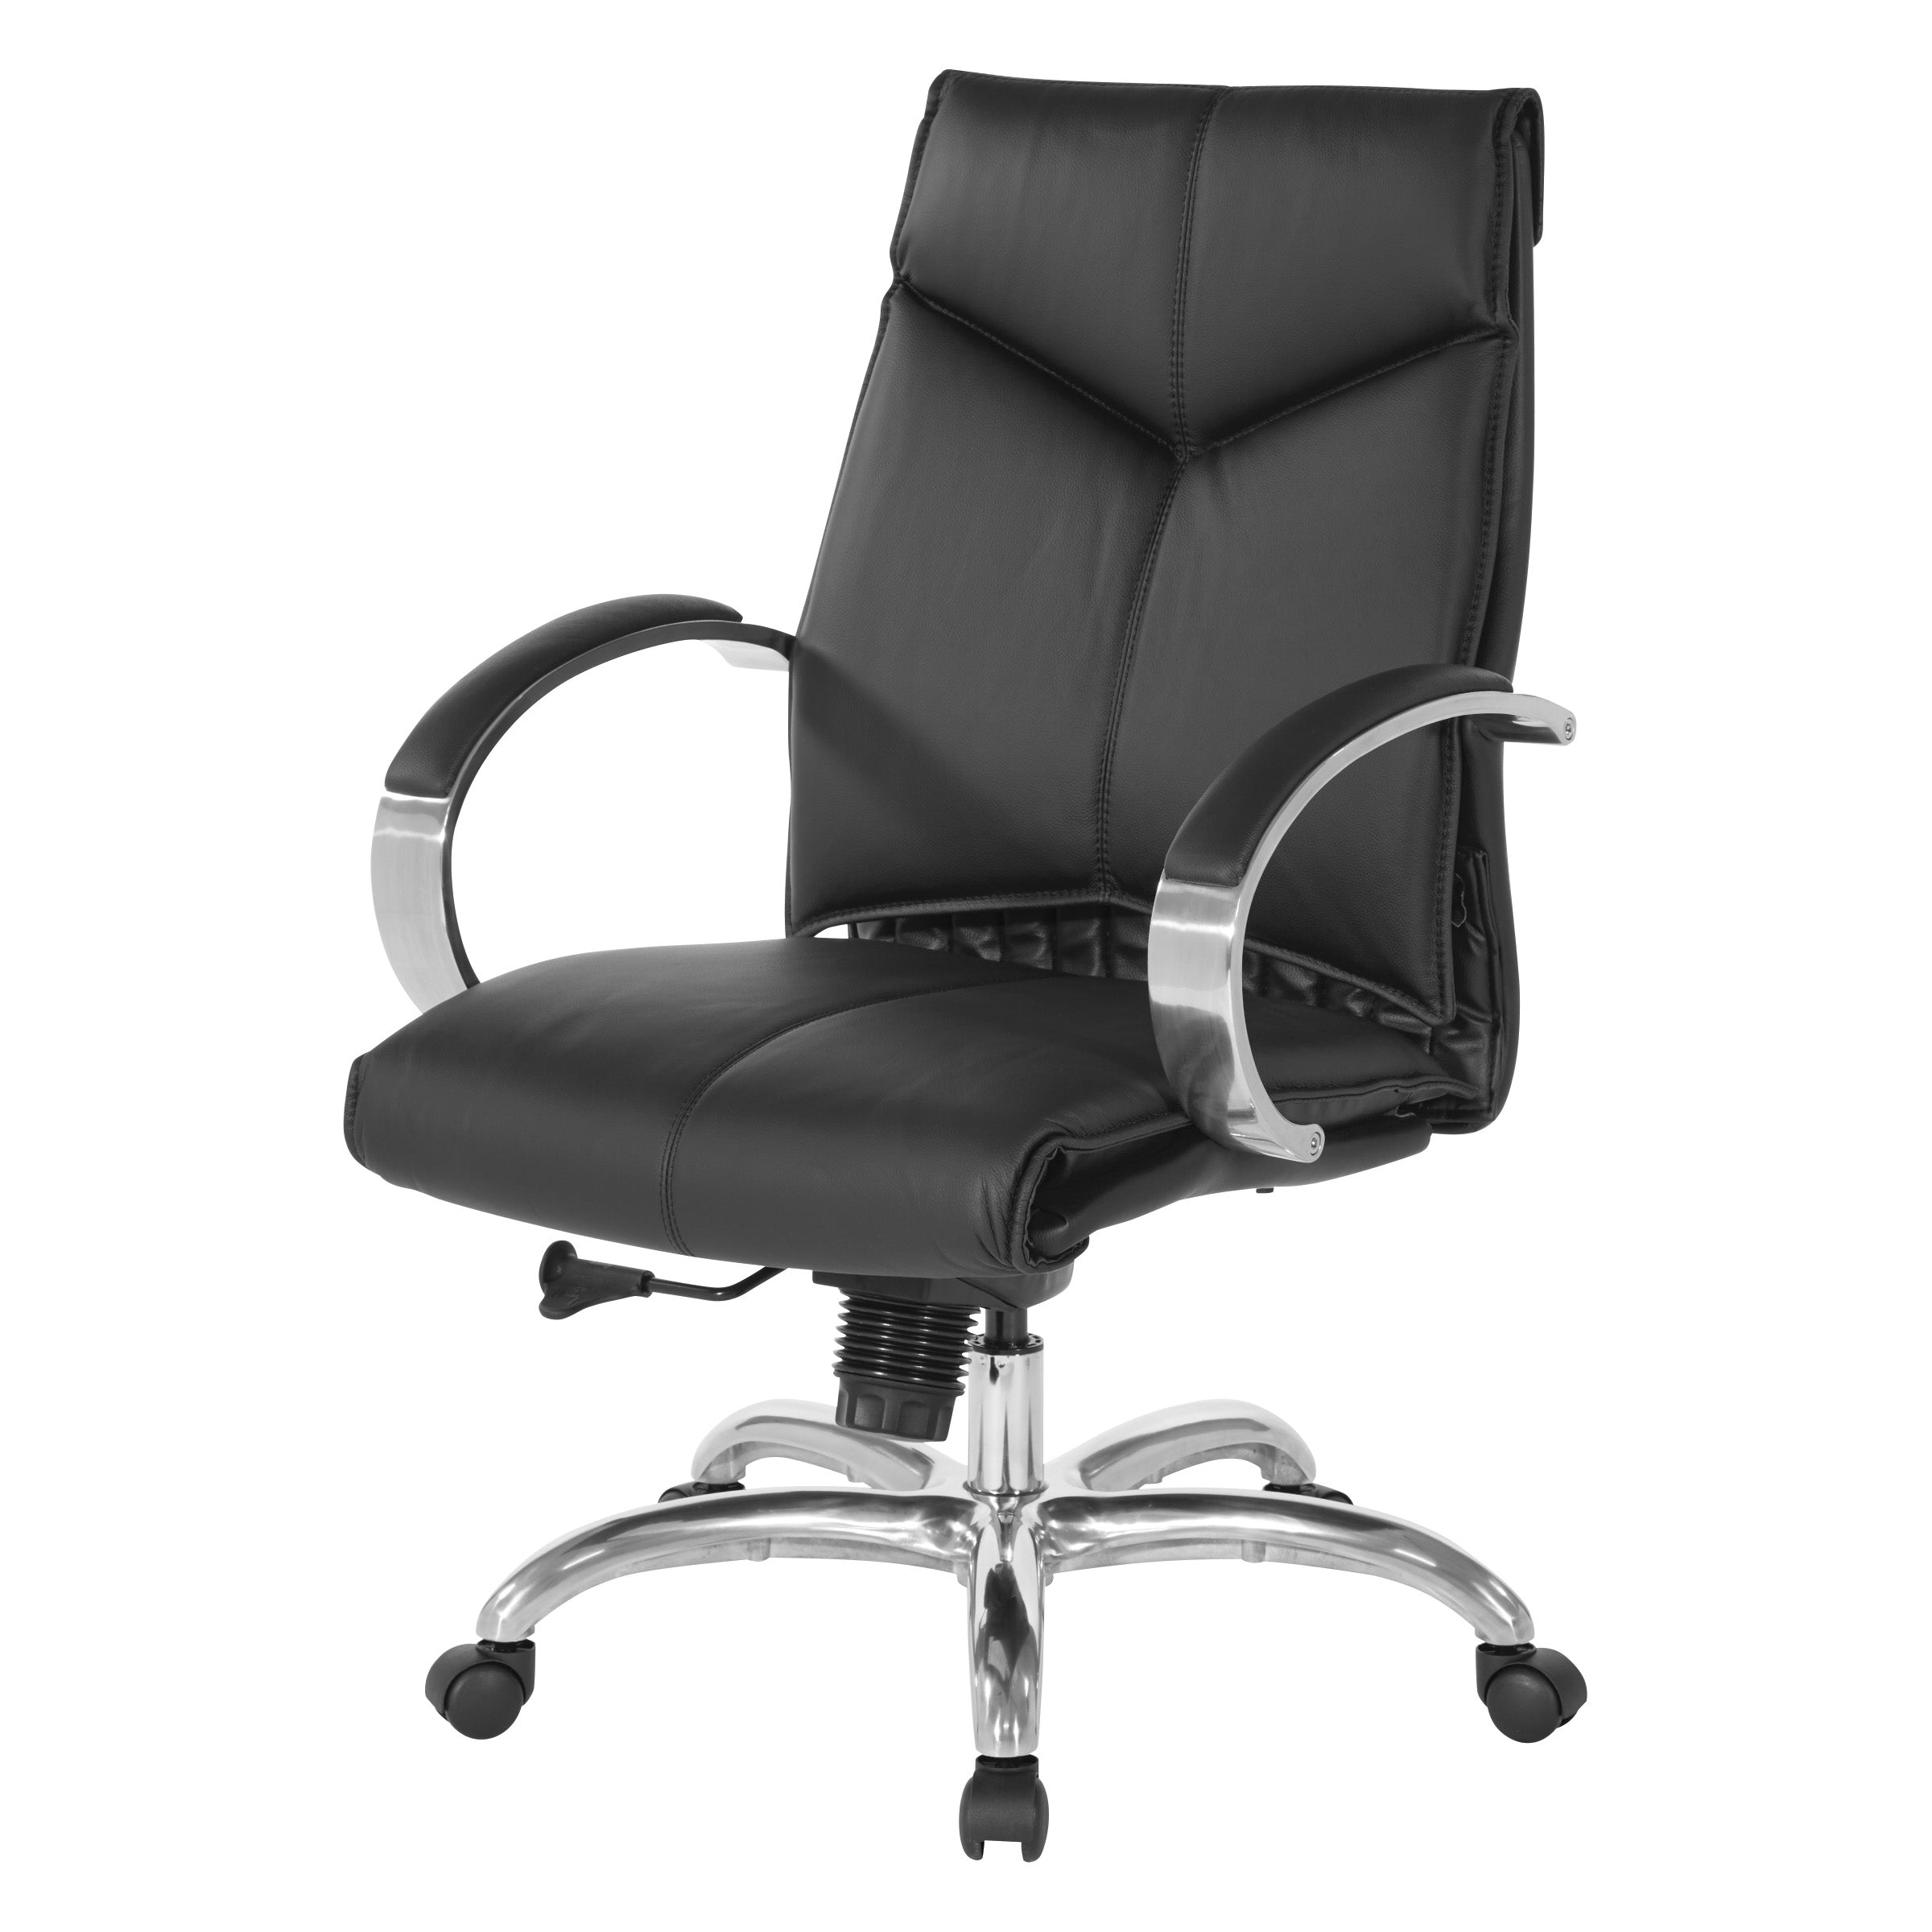 8201 - Deluxe Mid Back Executive Leather Chair with Chrome Base by OSP